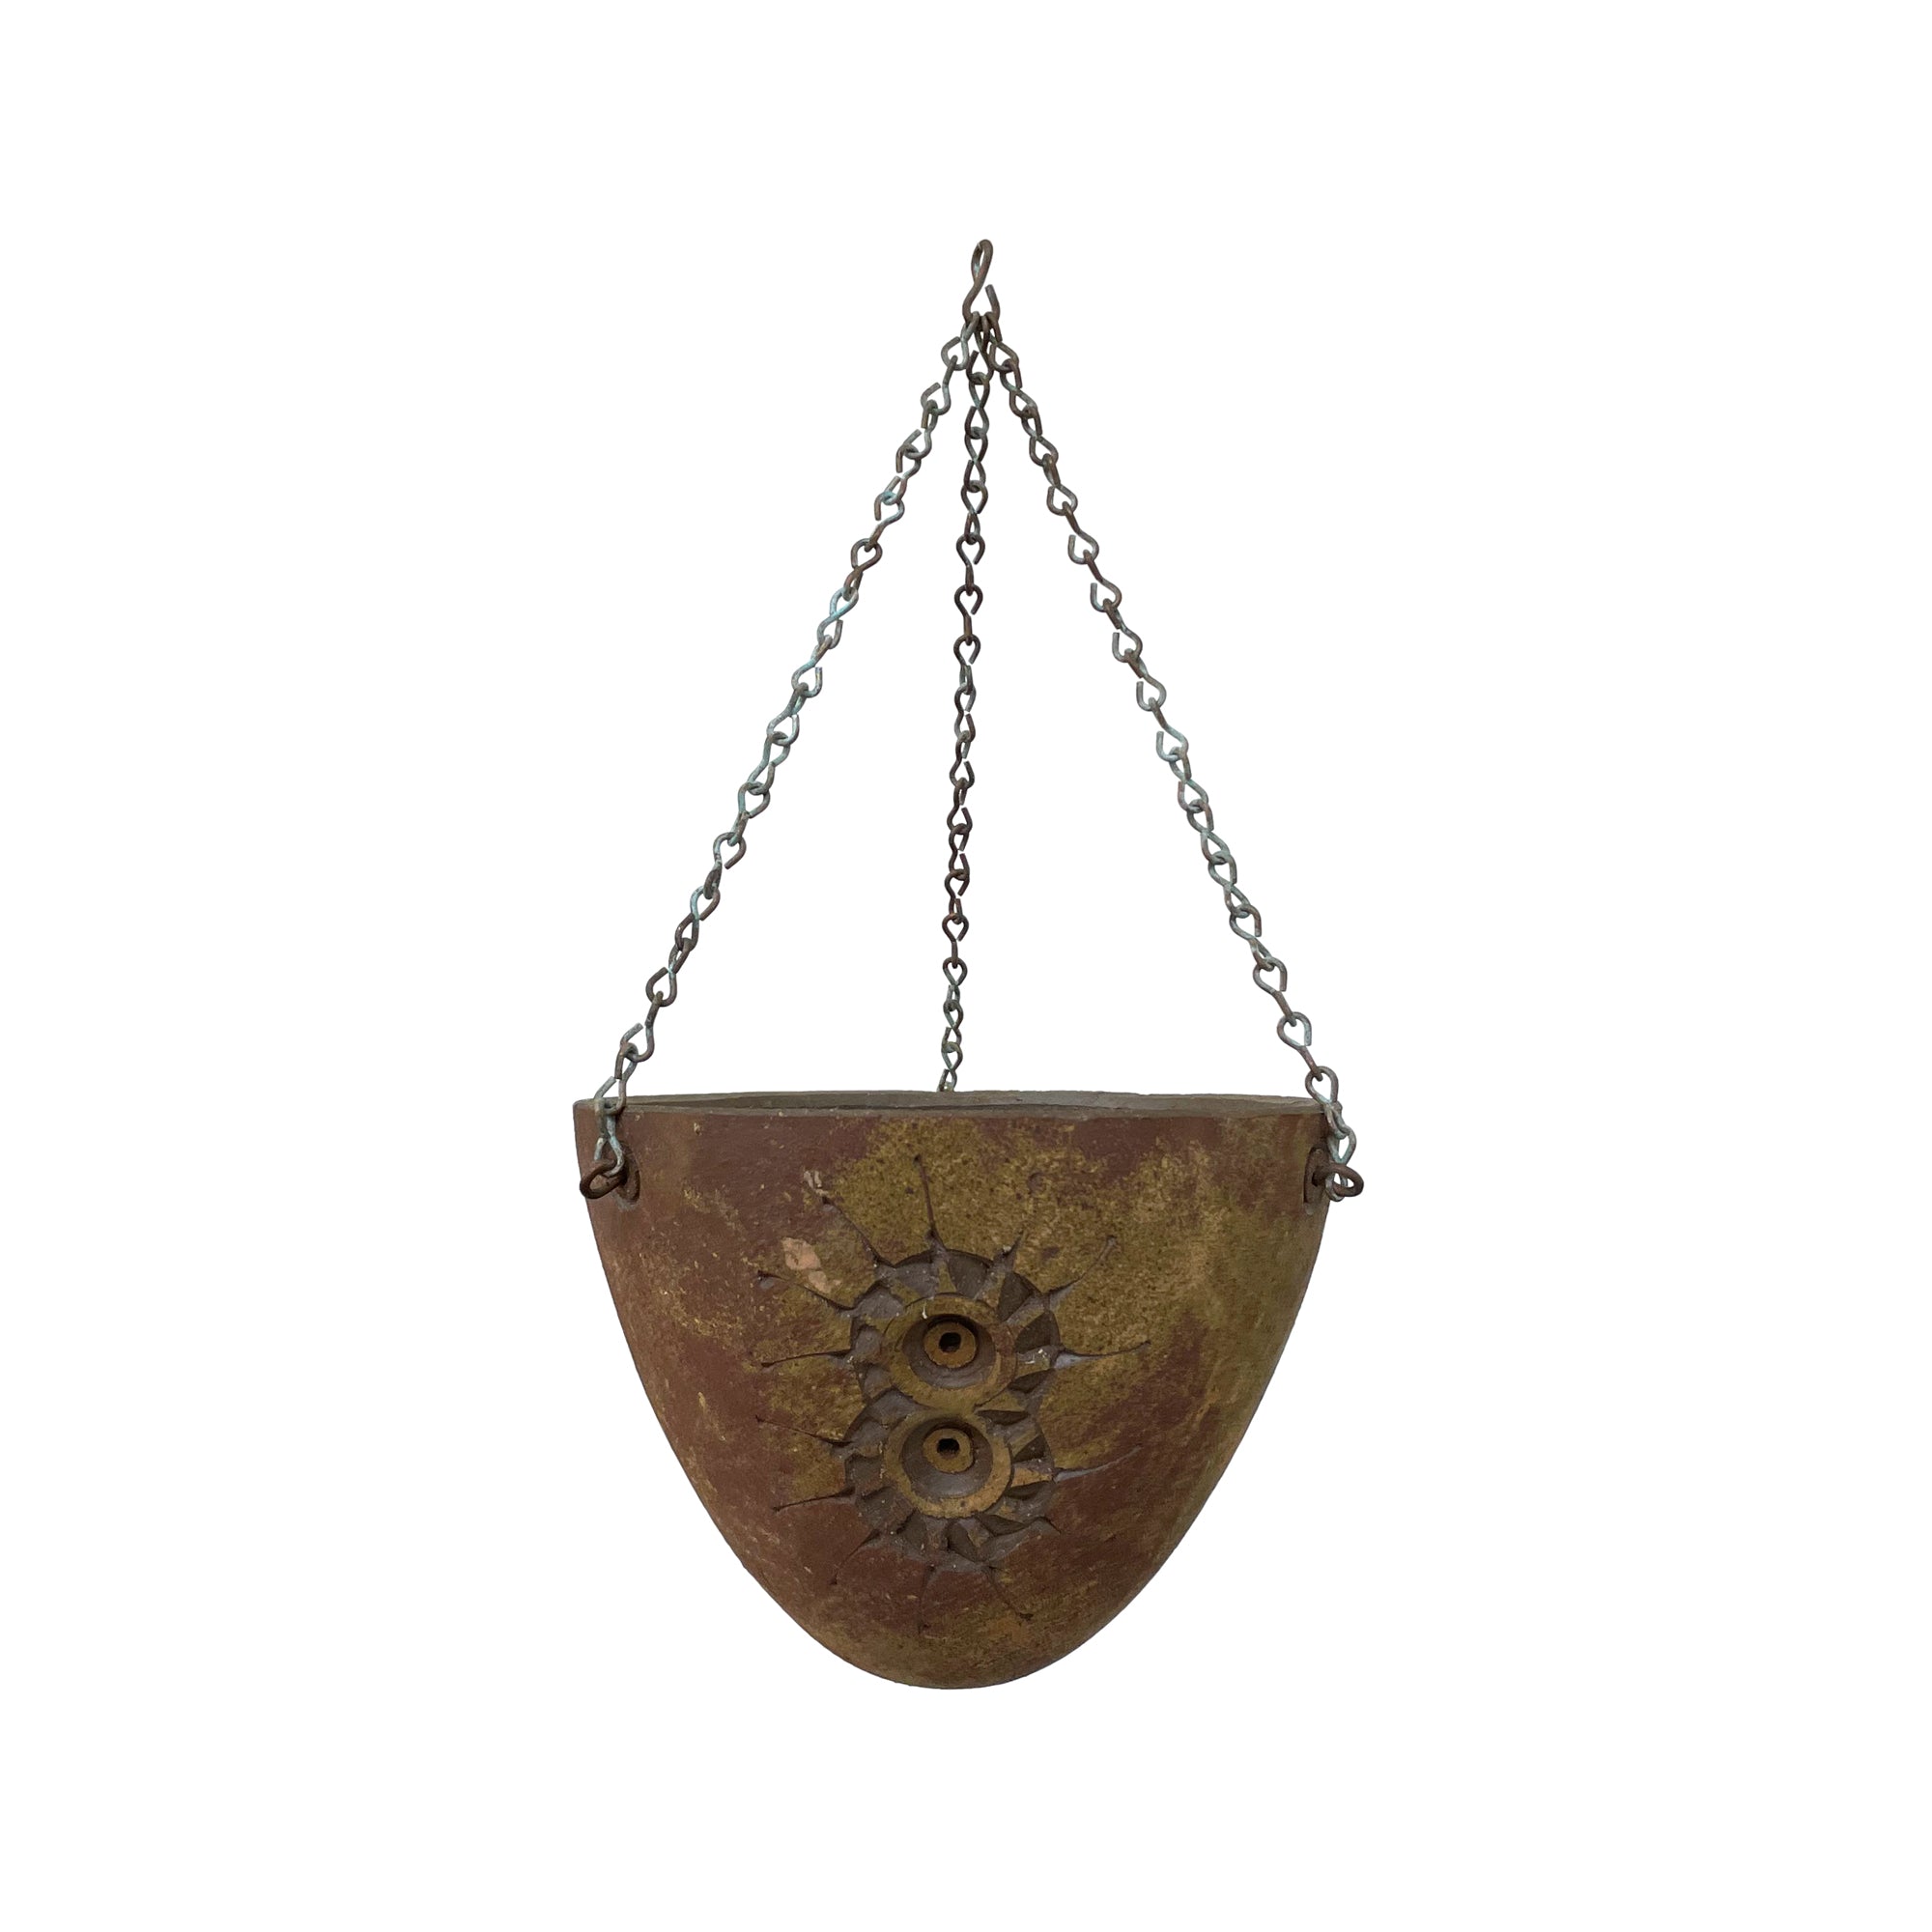 Vintage Ceramic Hanging Planter by Paolo Soleri